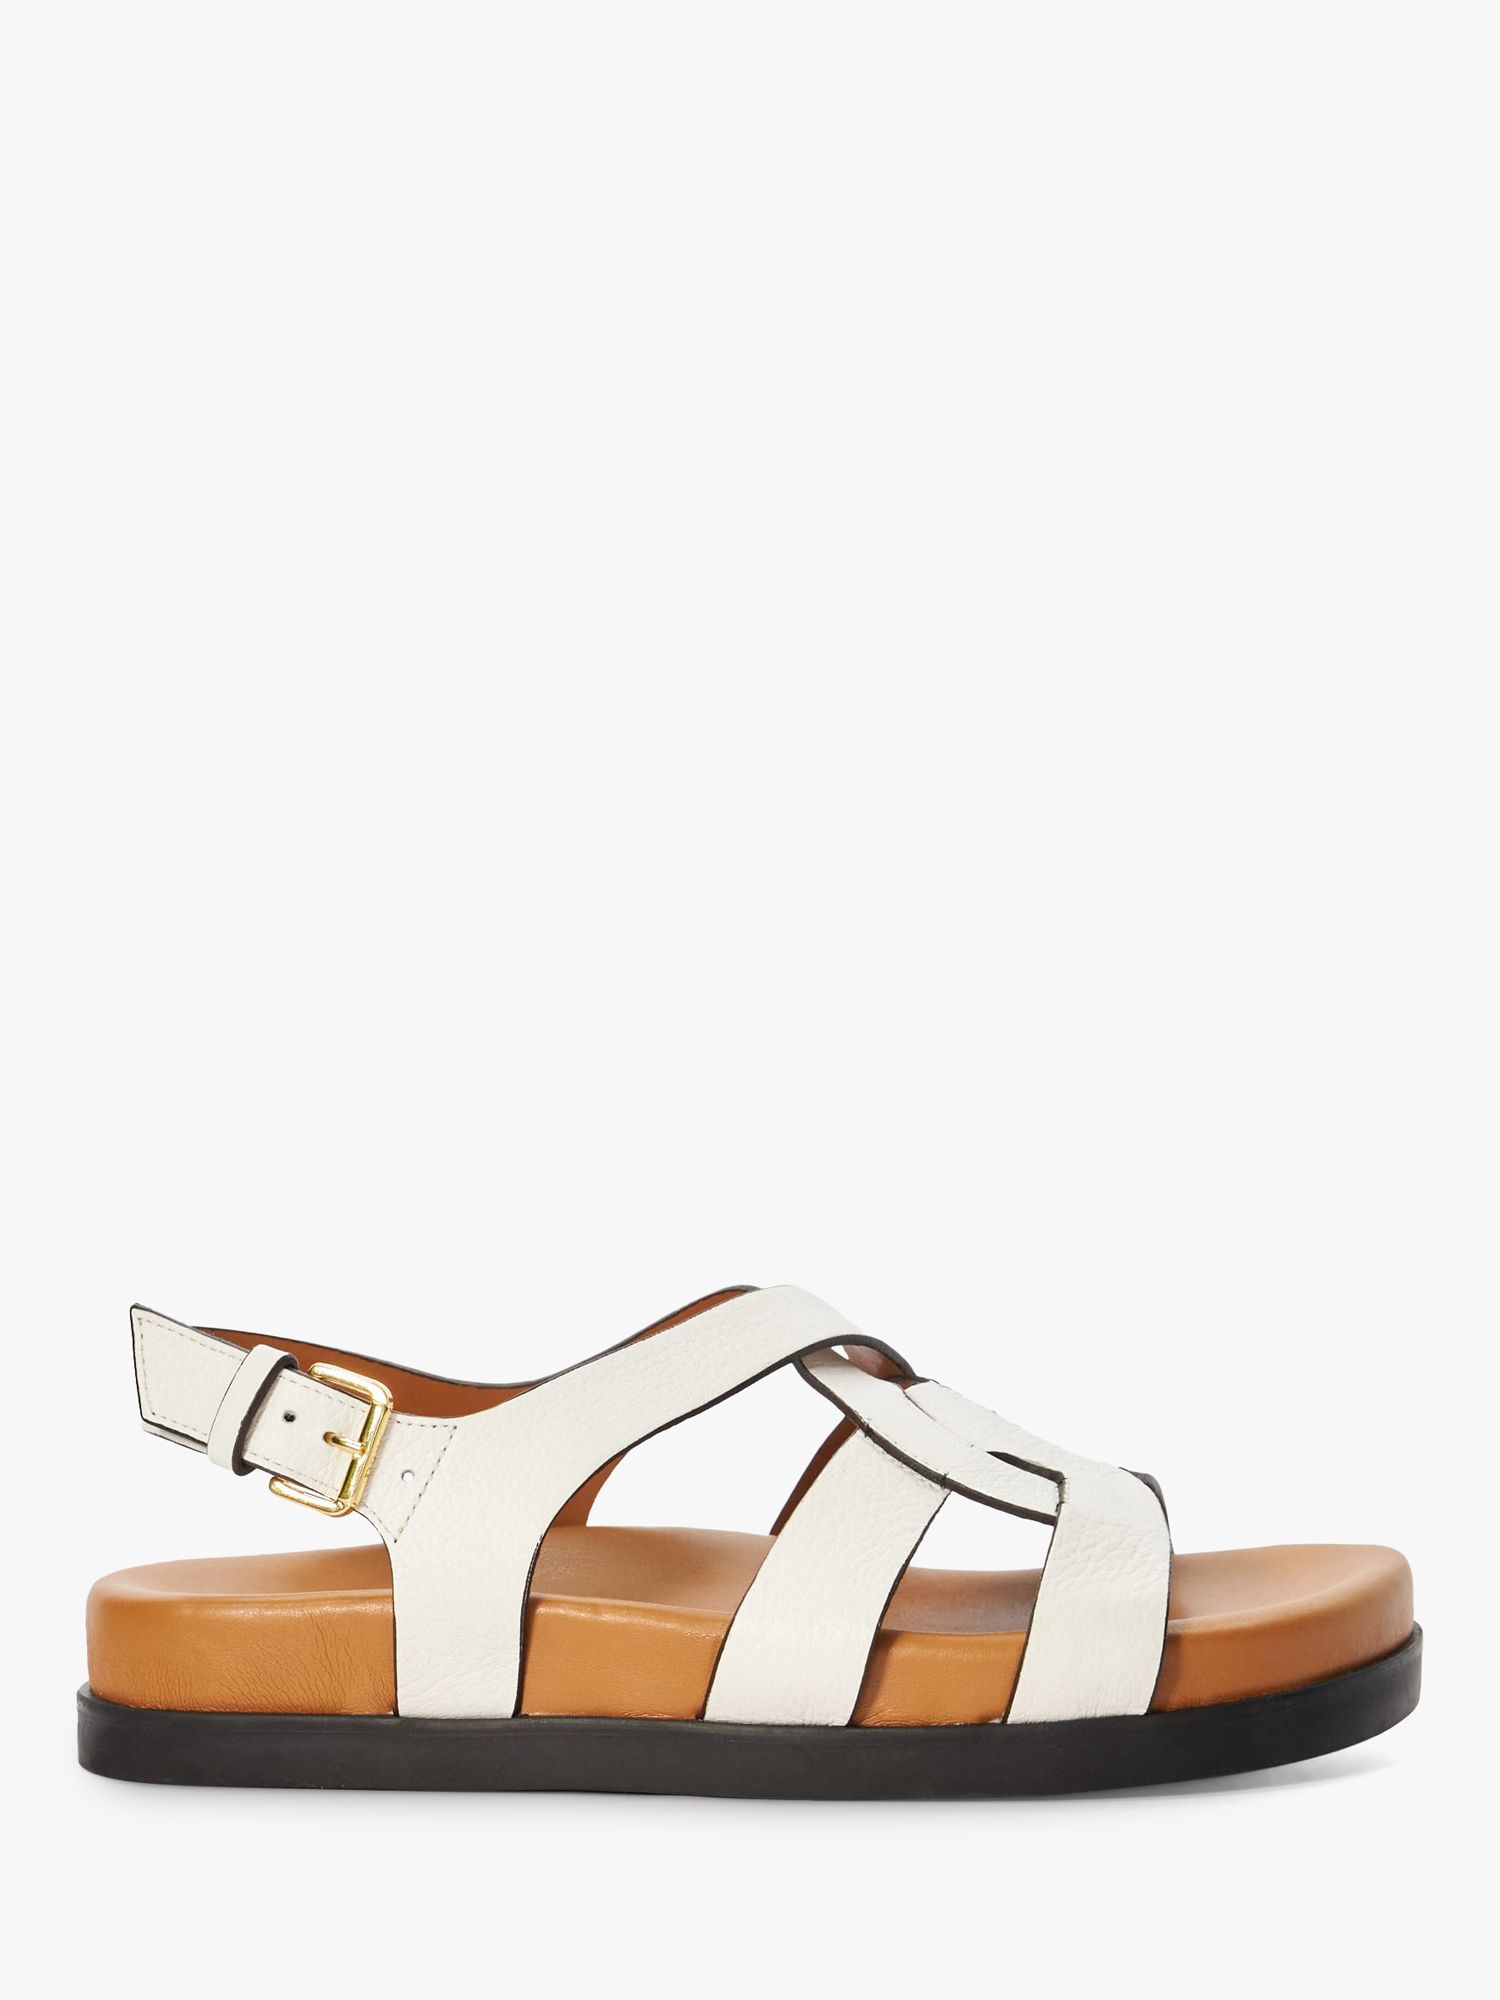 Dune Loupin Leather Footbed Sandals, White at John Lewis & Partners